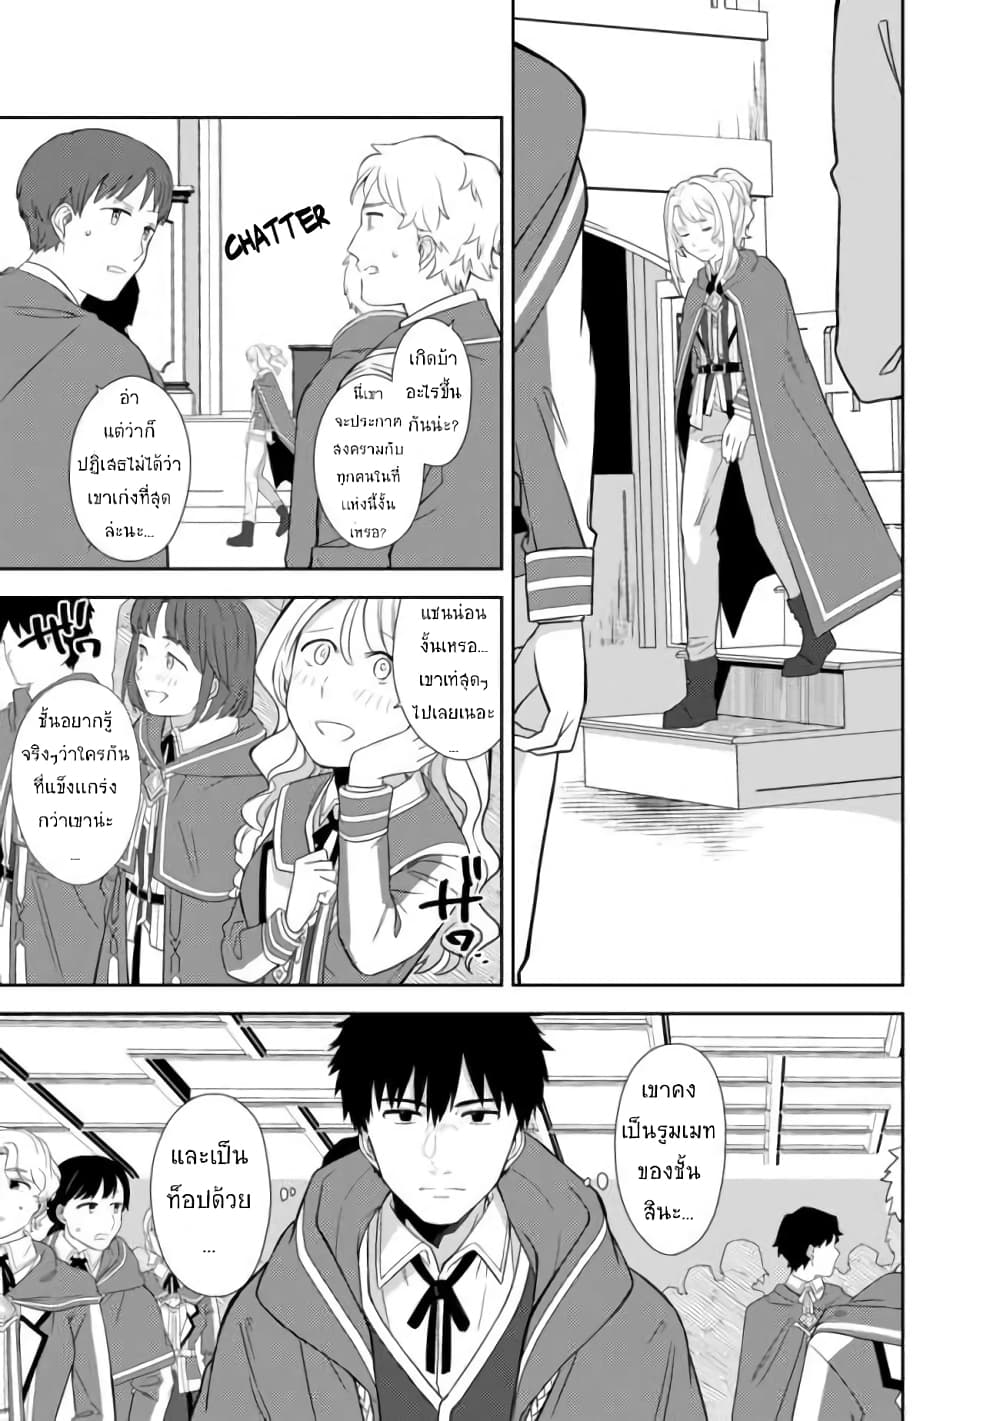 The Reincarnated Swordsman With 9999 Strength Wants to Become a Magician! ตอนที่ 1. 2 (31)